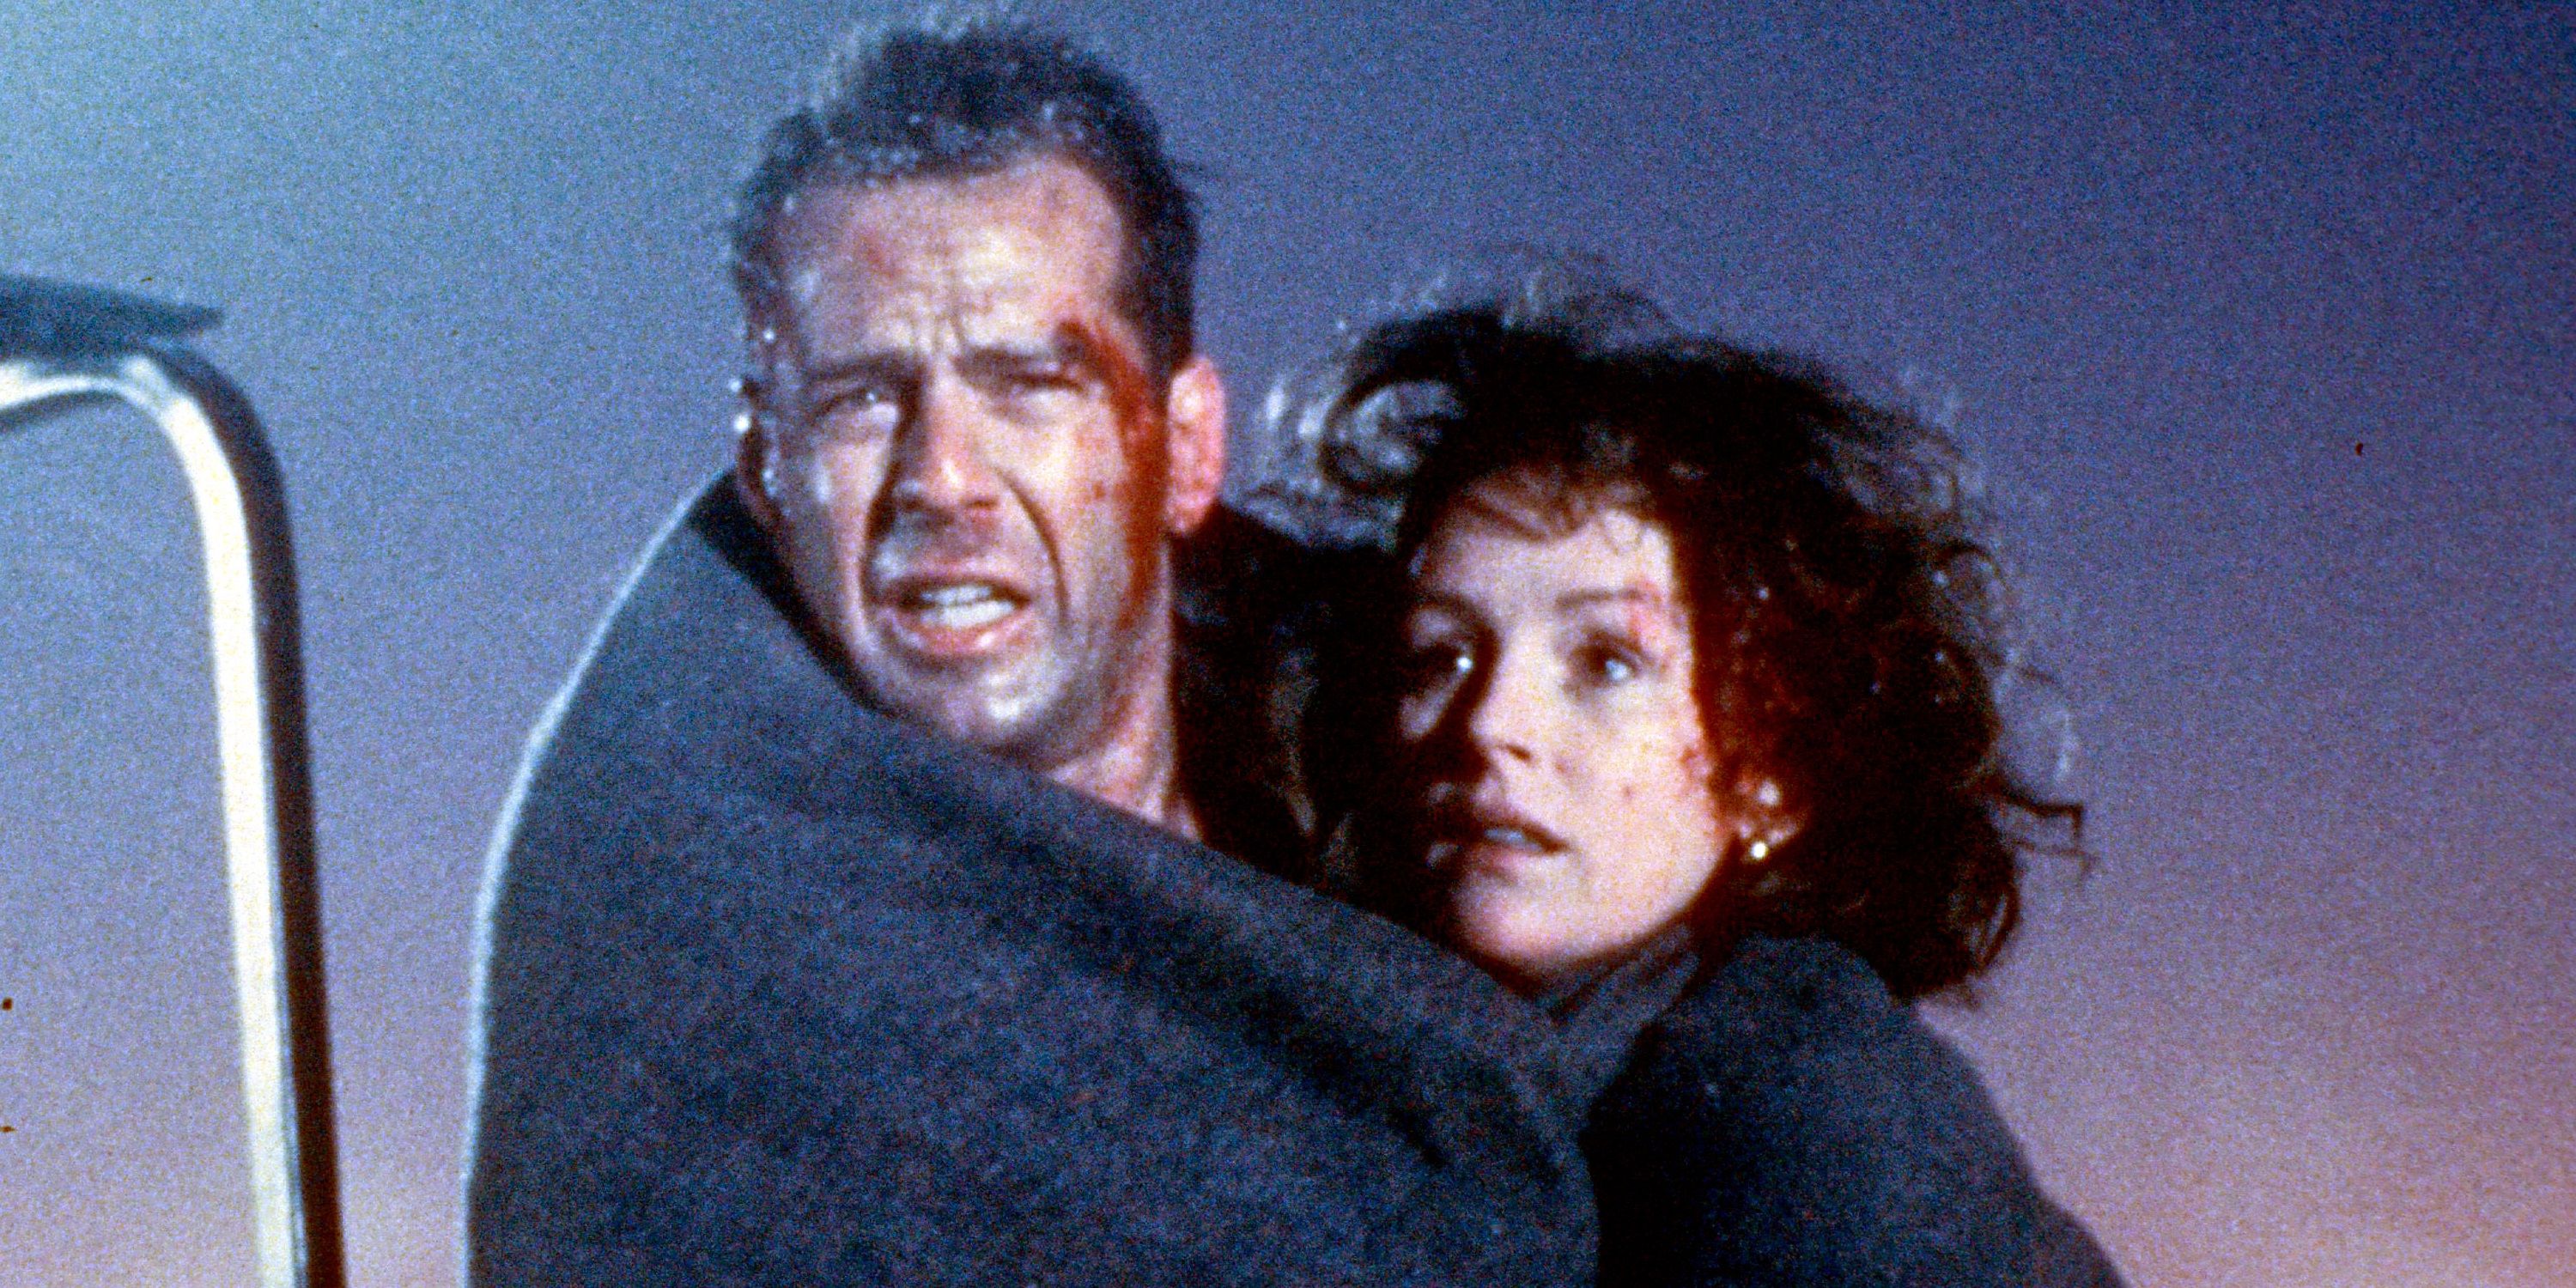 John and Holly McClane in Die Hard 2